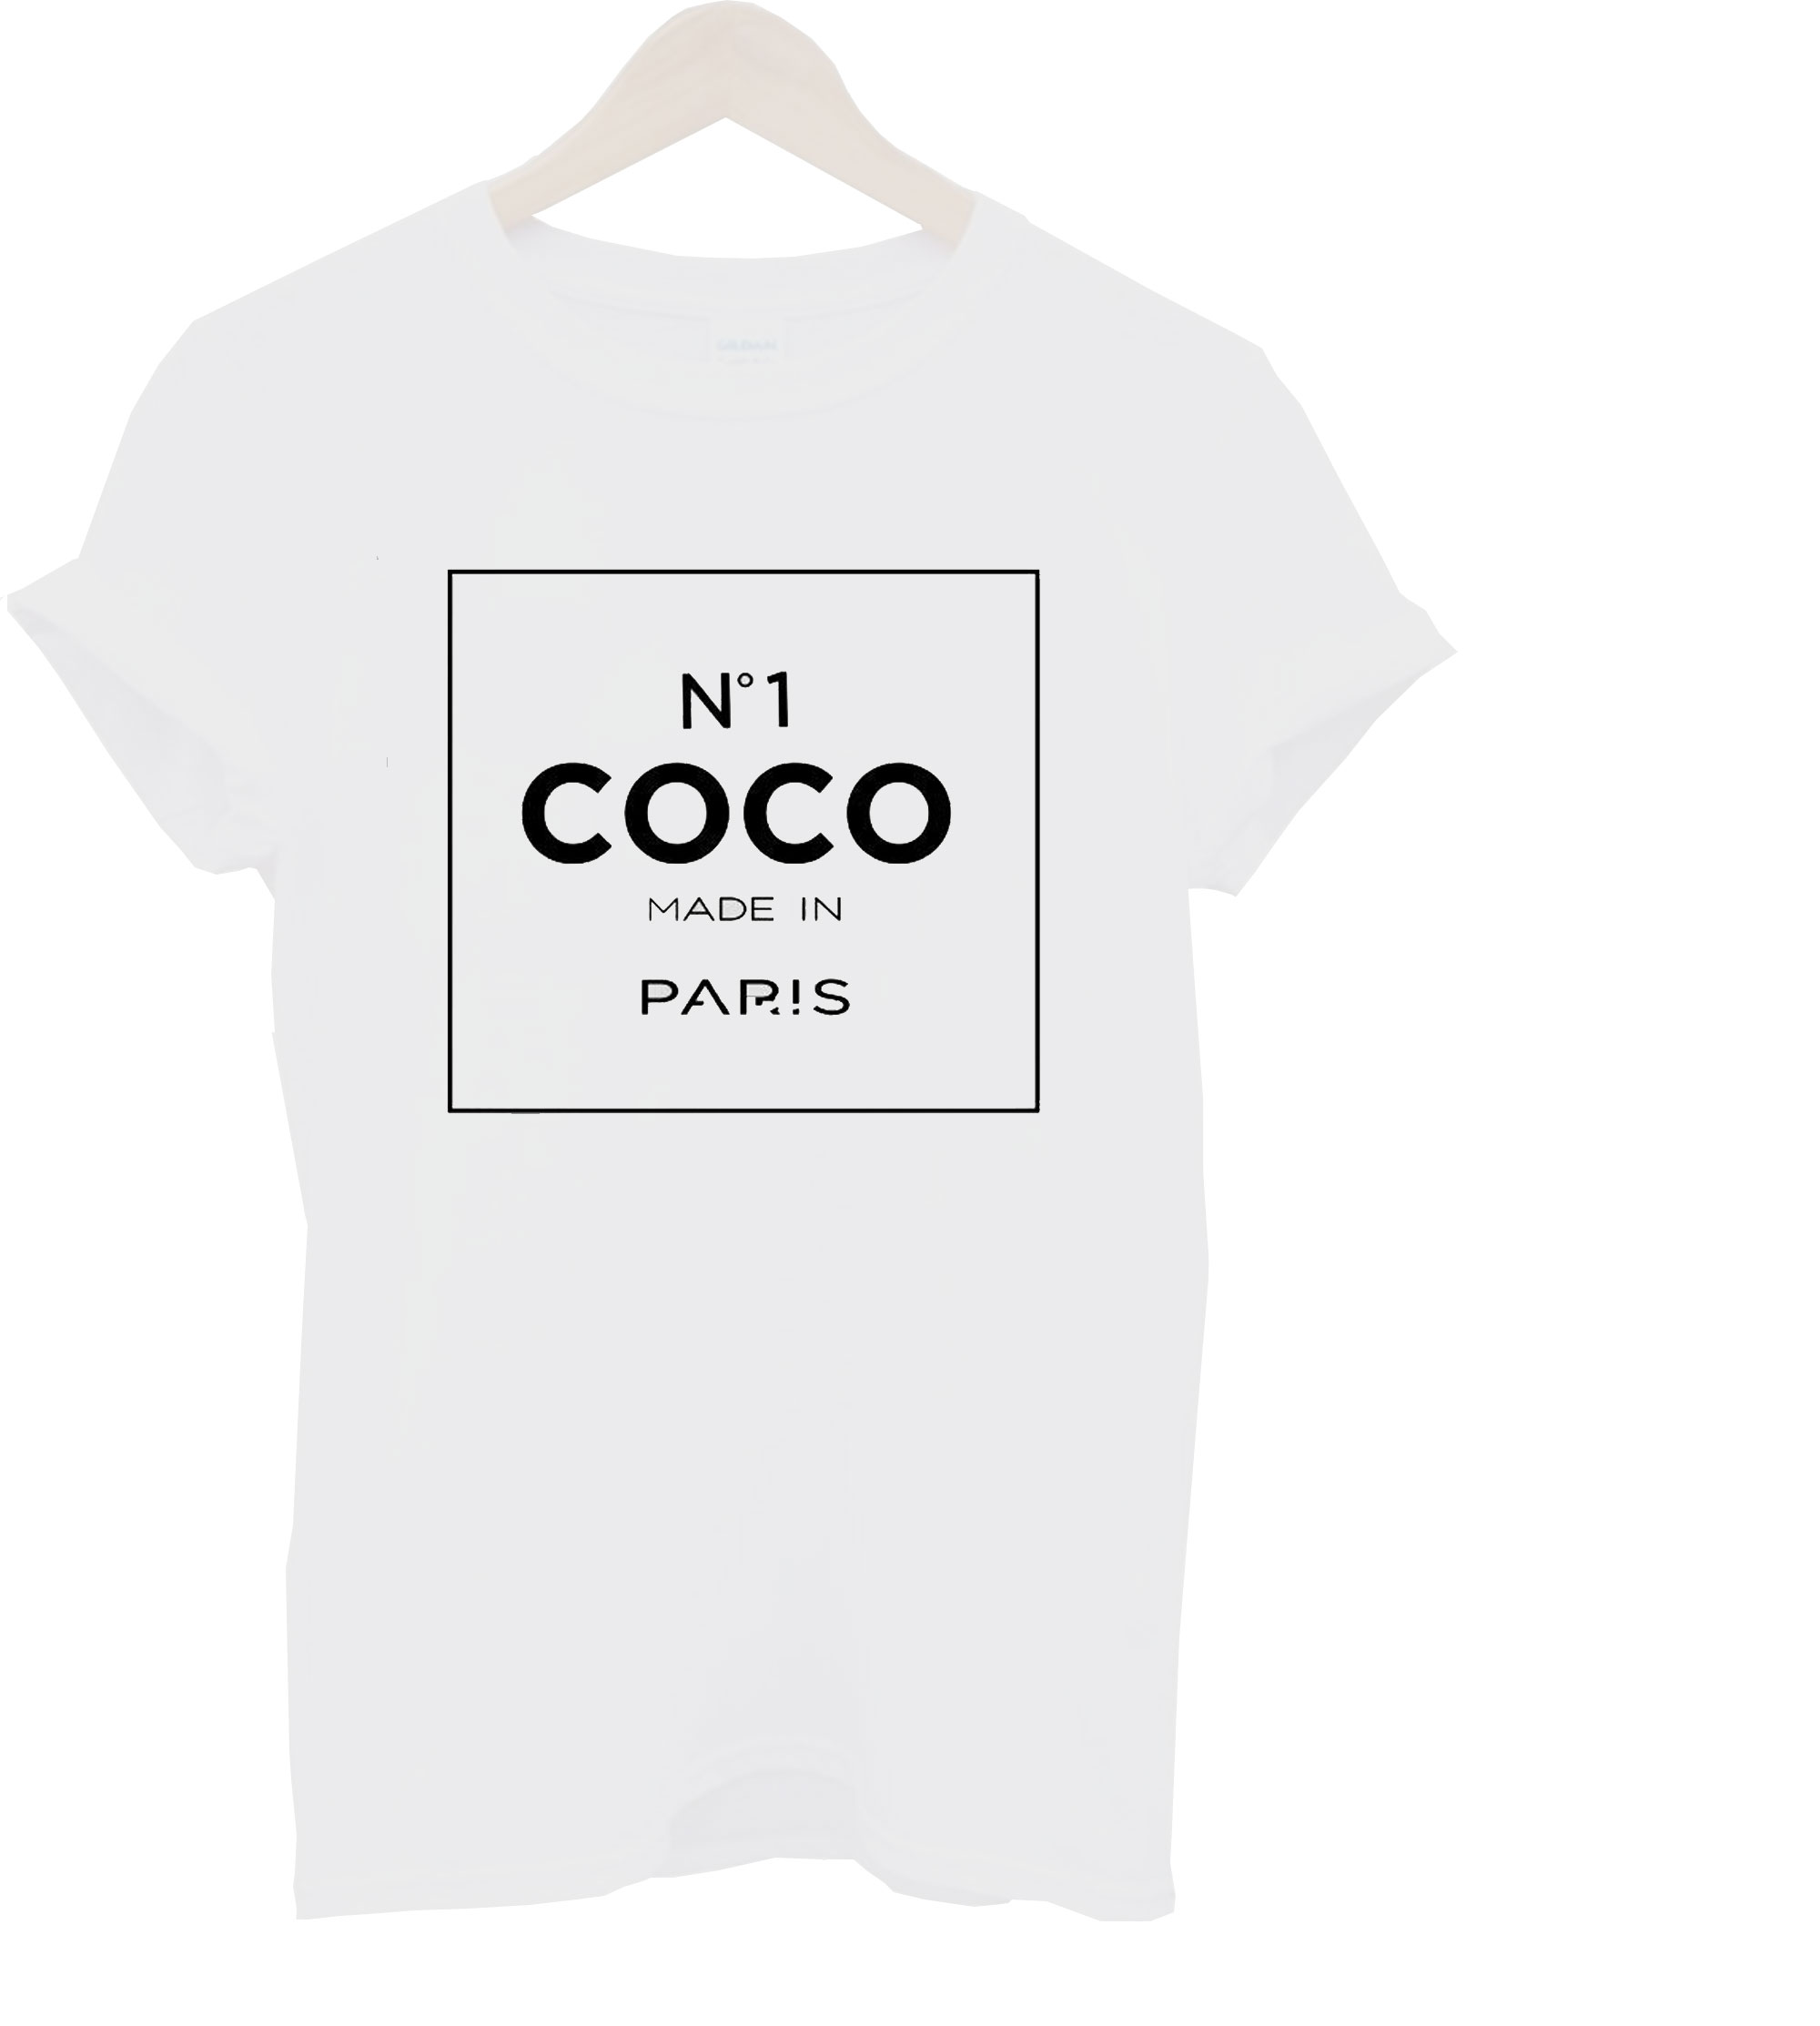 Coco Chanel Inspired Art T Shirt –